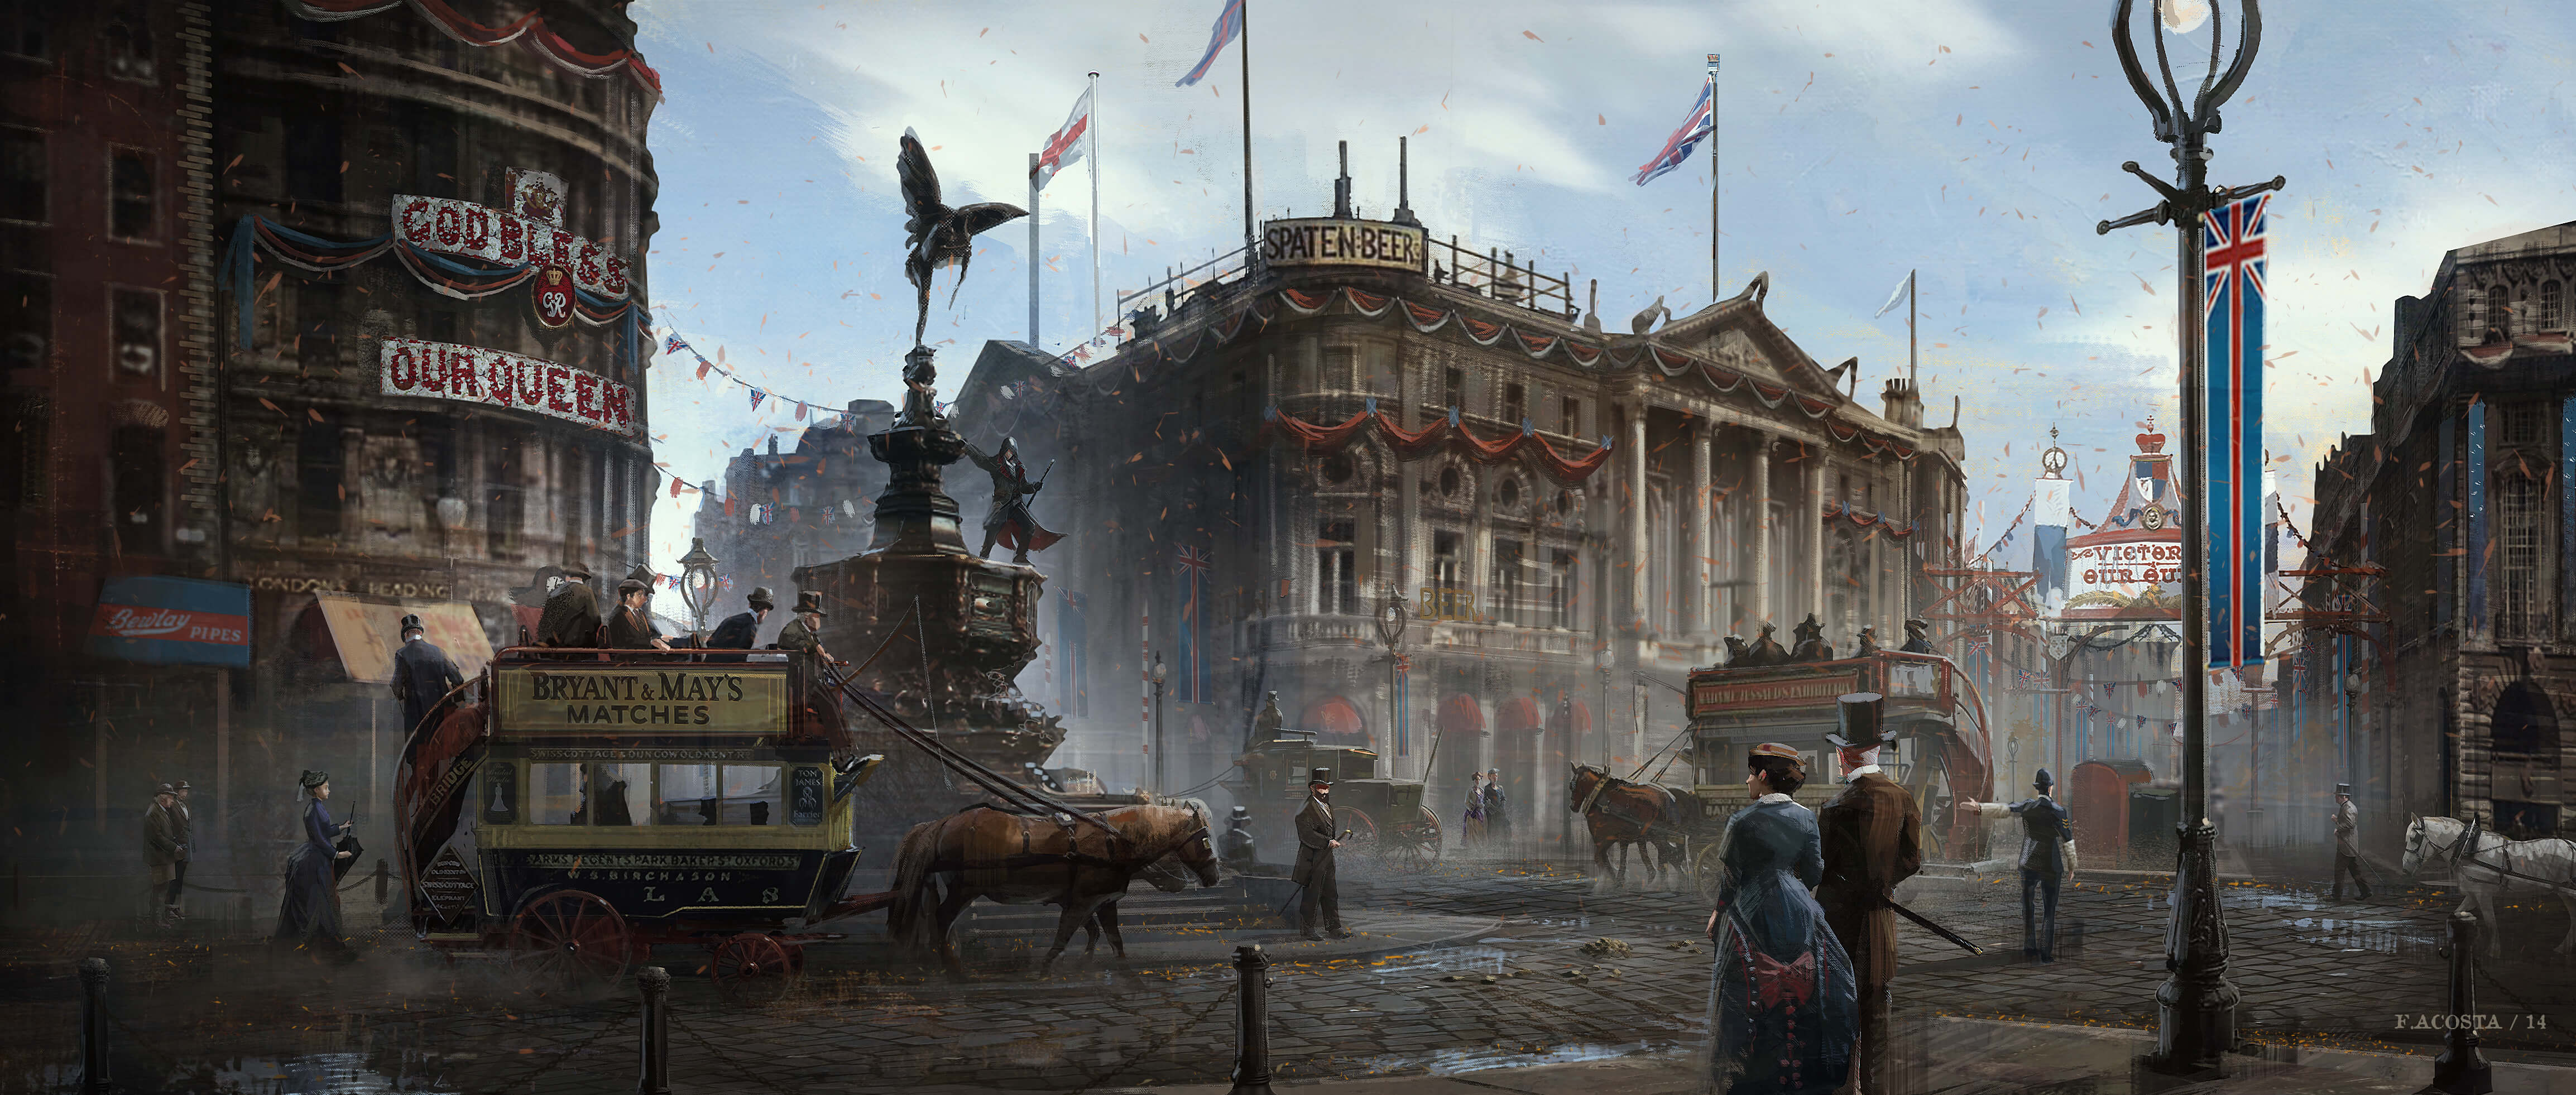 Assassins-Creed-Syndicate-Piccadilly-Concept-Art.jpg